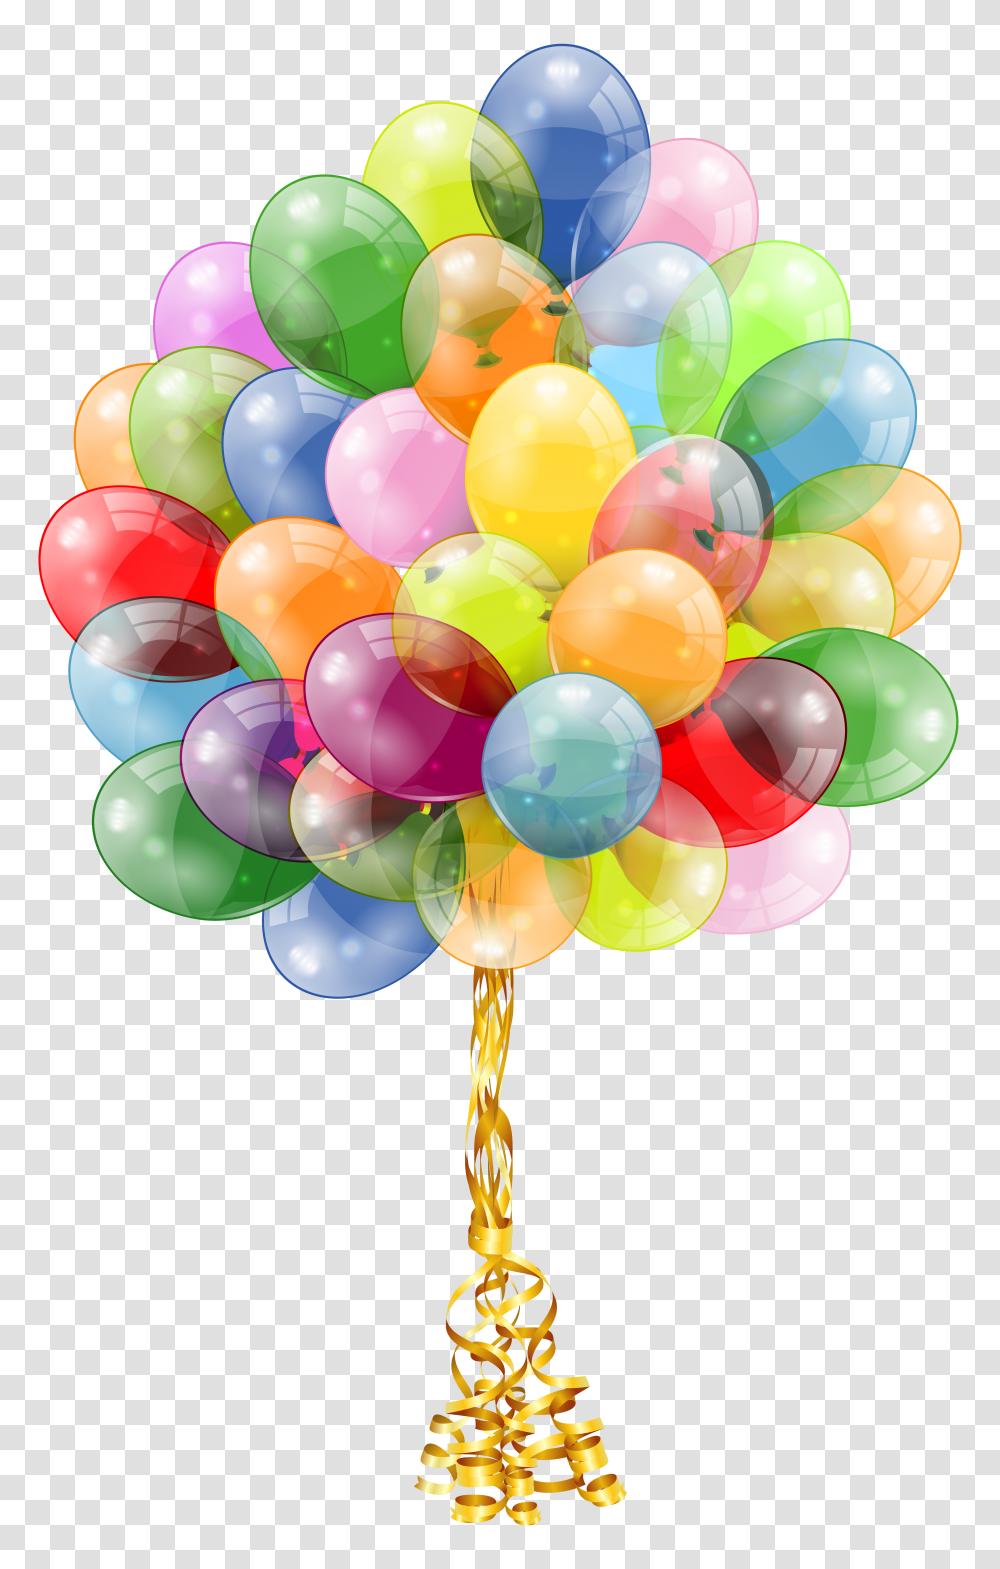 Colorful Balloons Download Image Arts Birthday Bunch Of Balloons Transparent Png